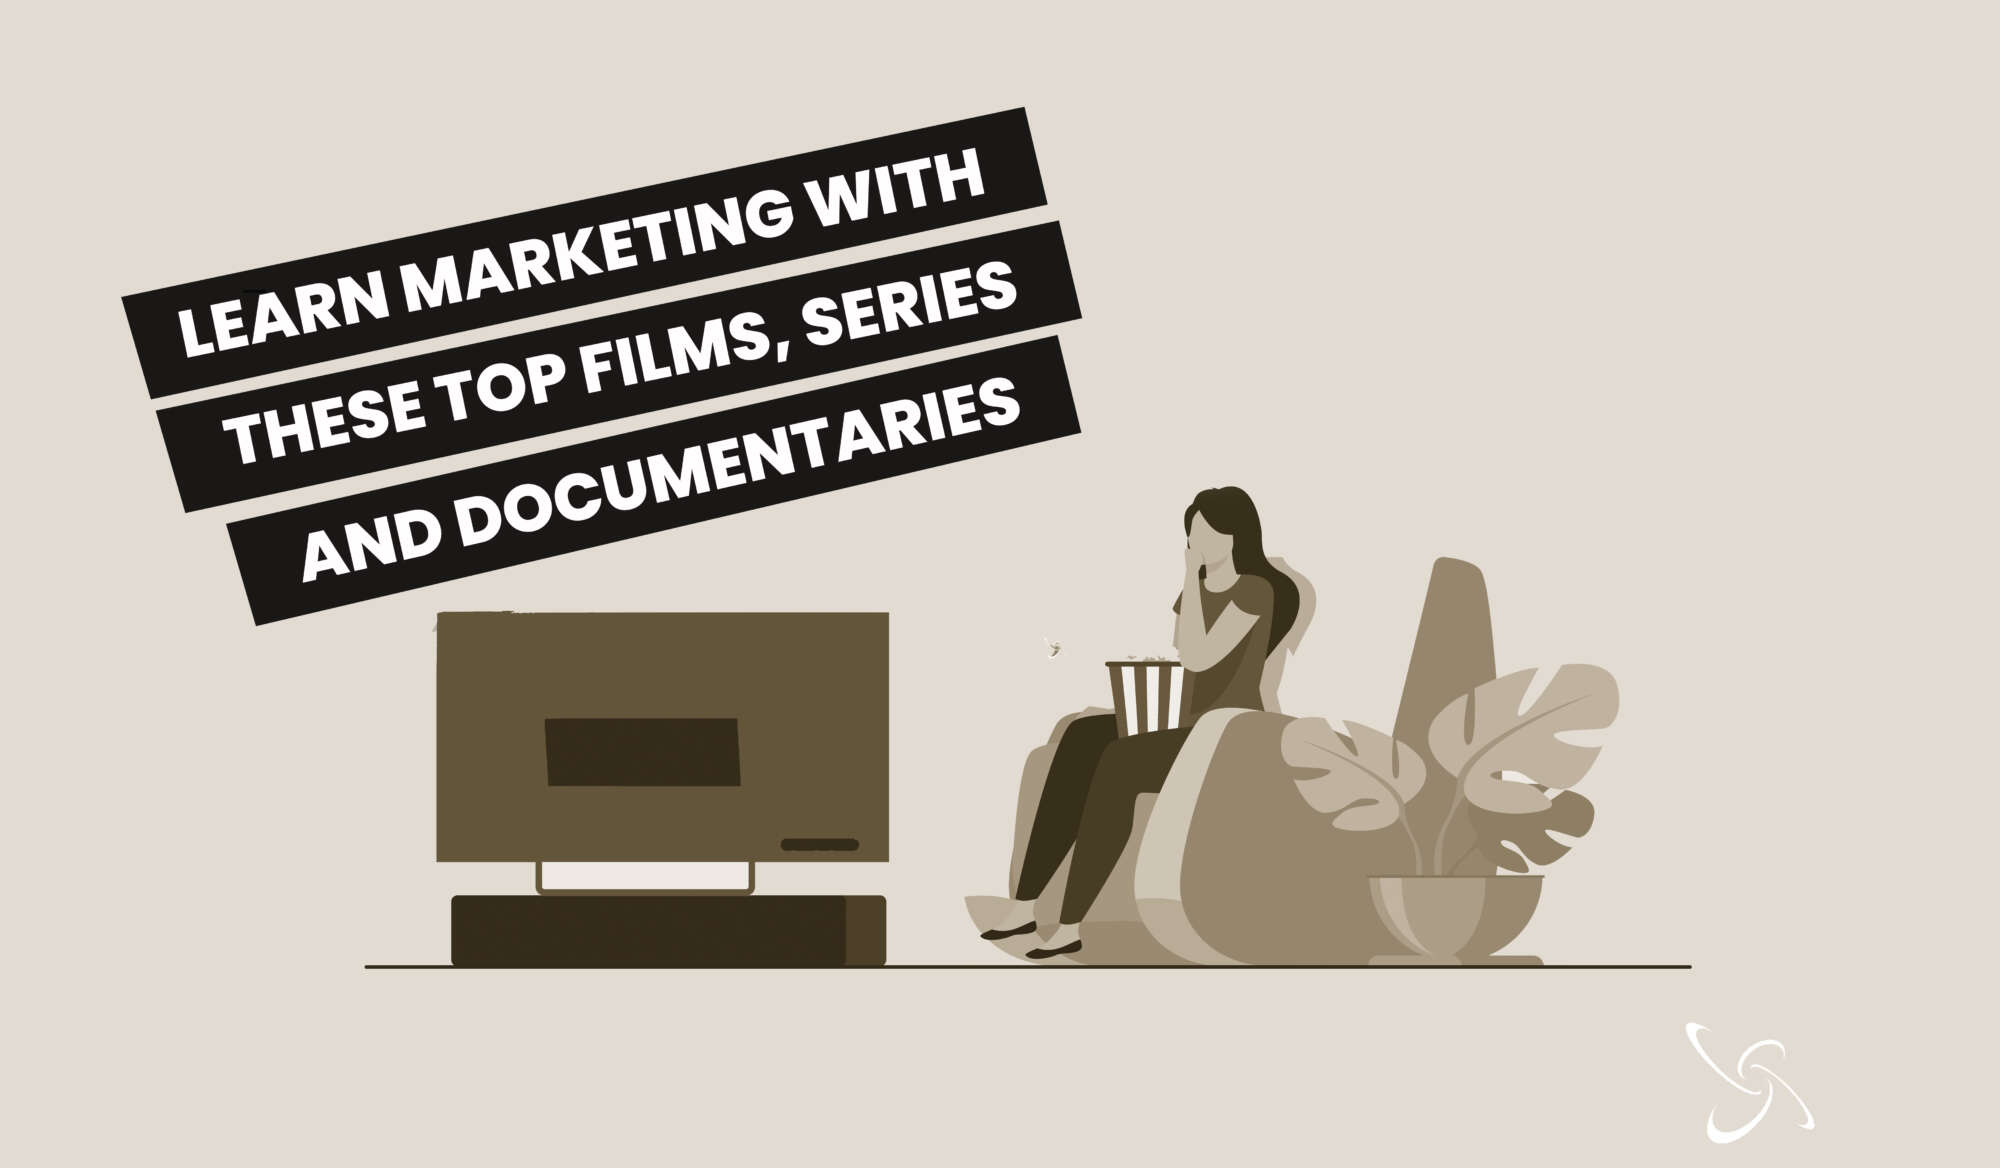 Learn marketing with these TOP movies, series and documentaries